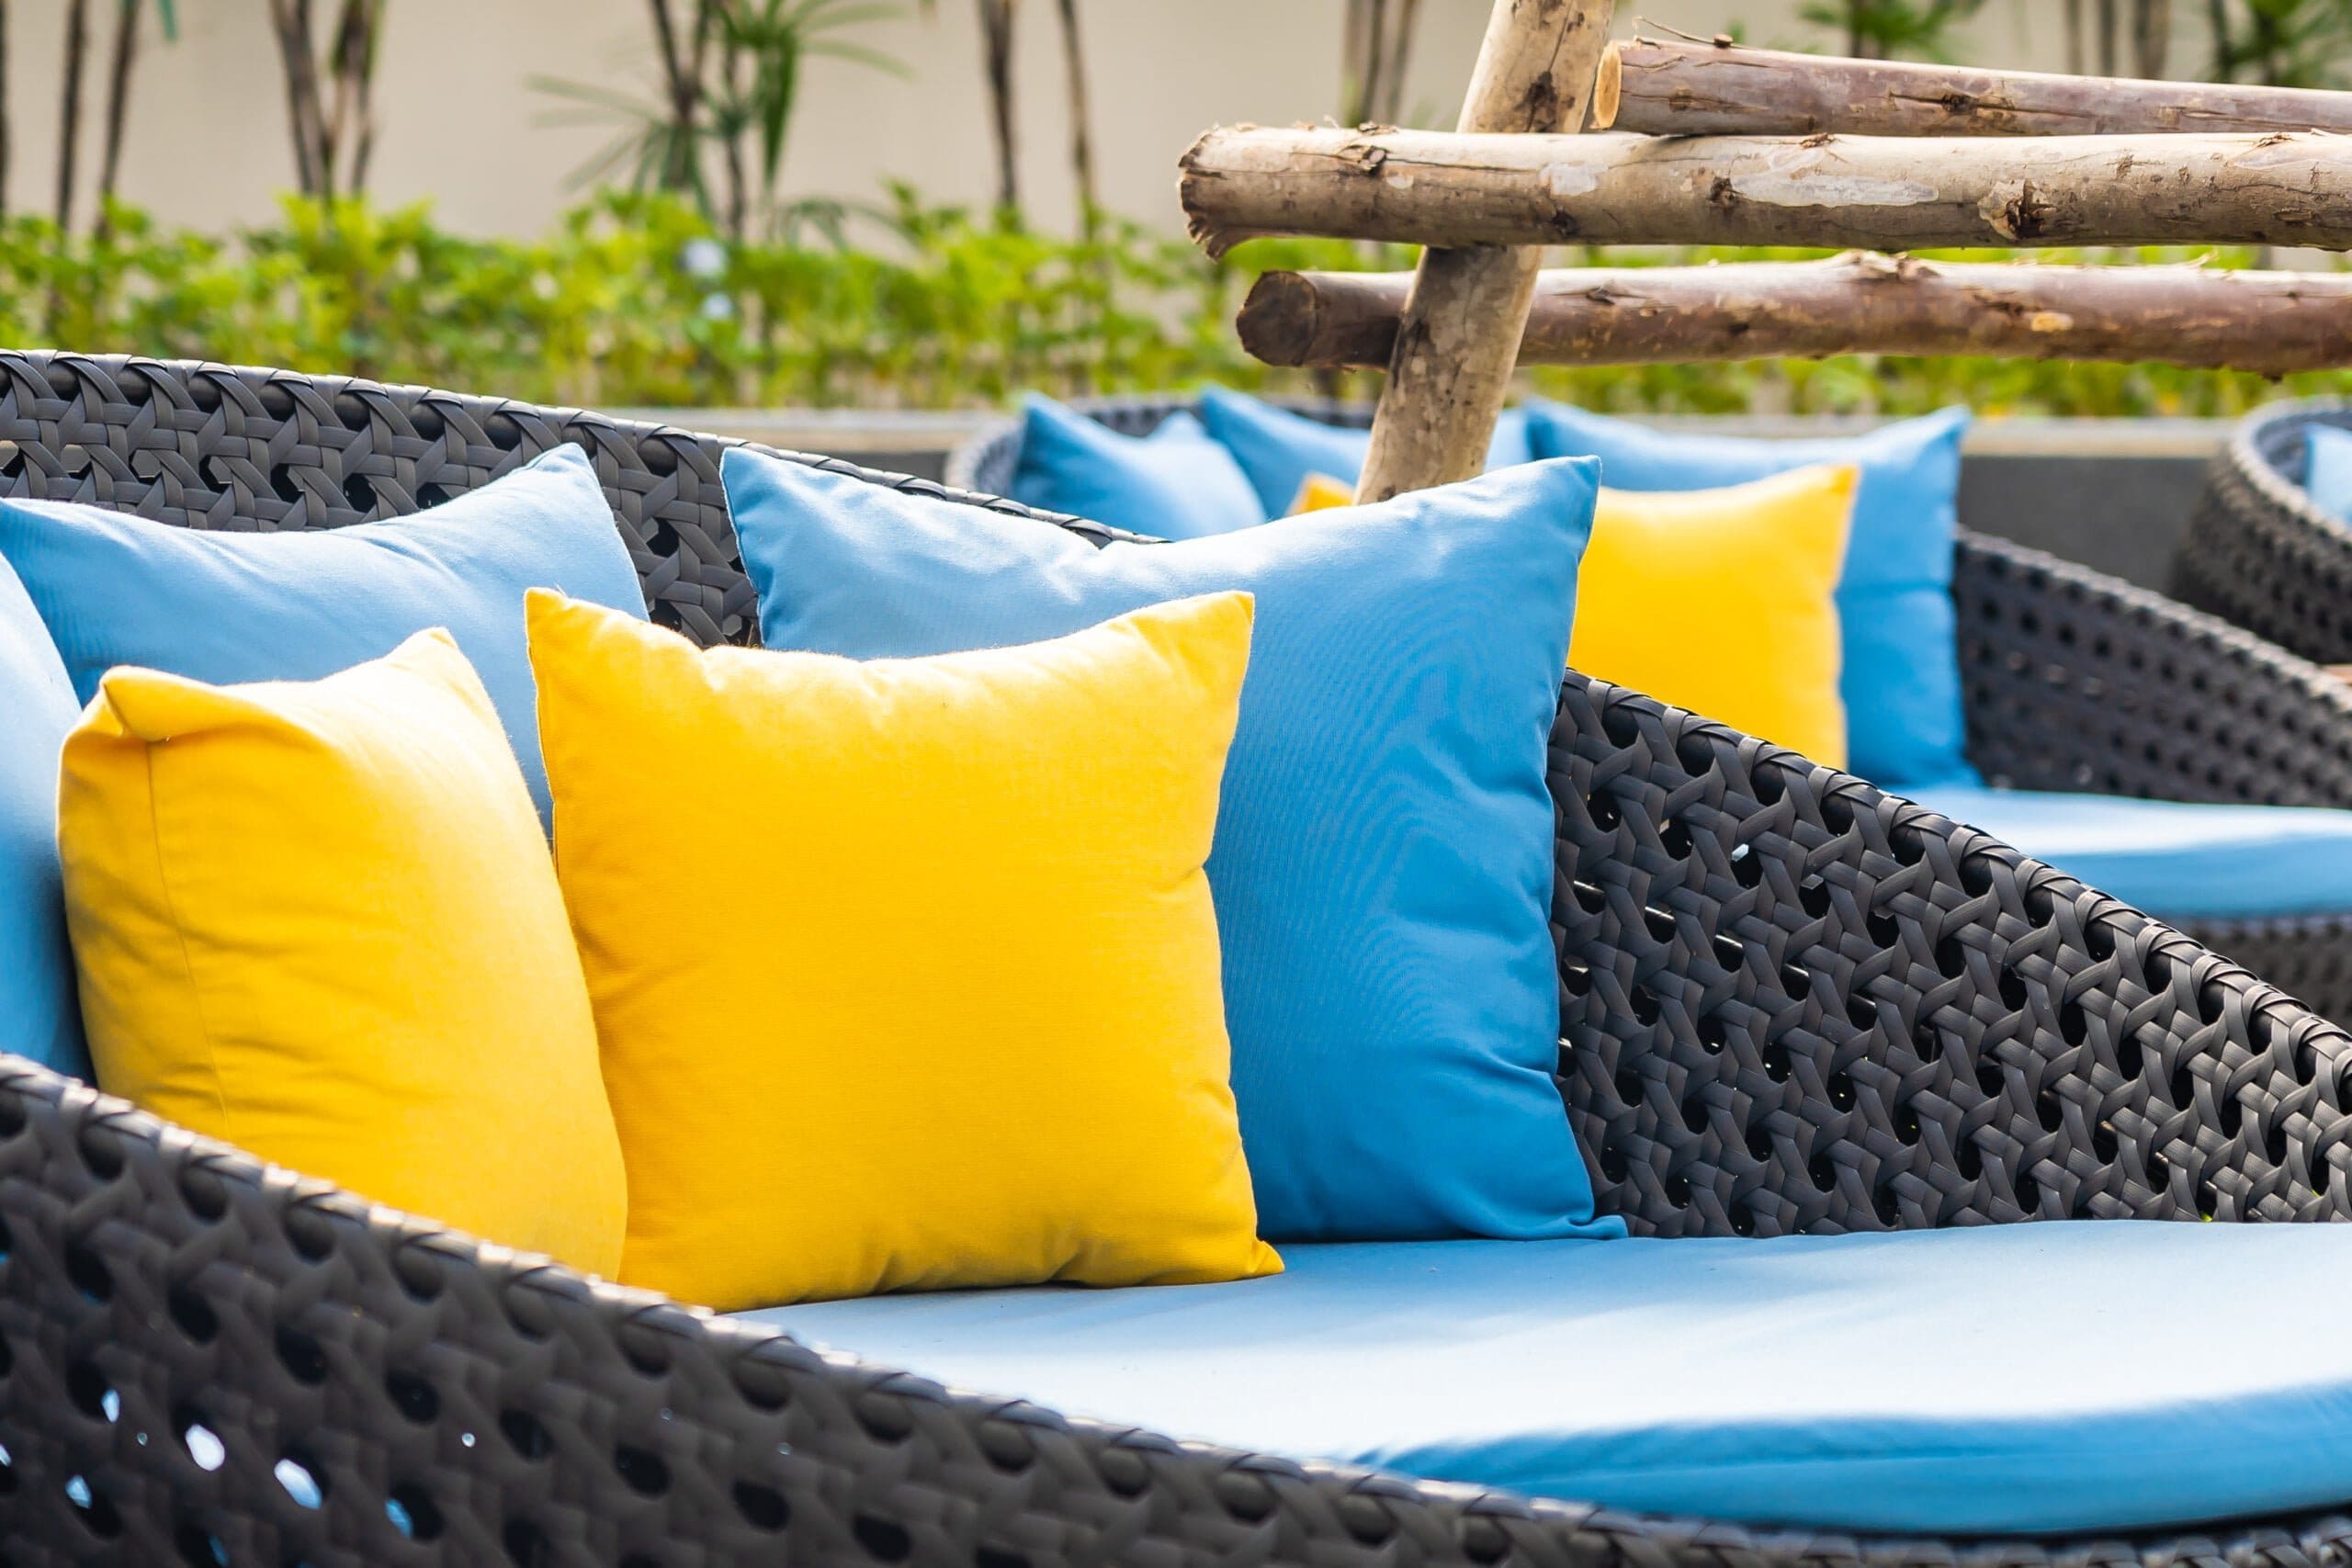 outdoor patio chairs with pillows and cushions.